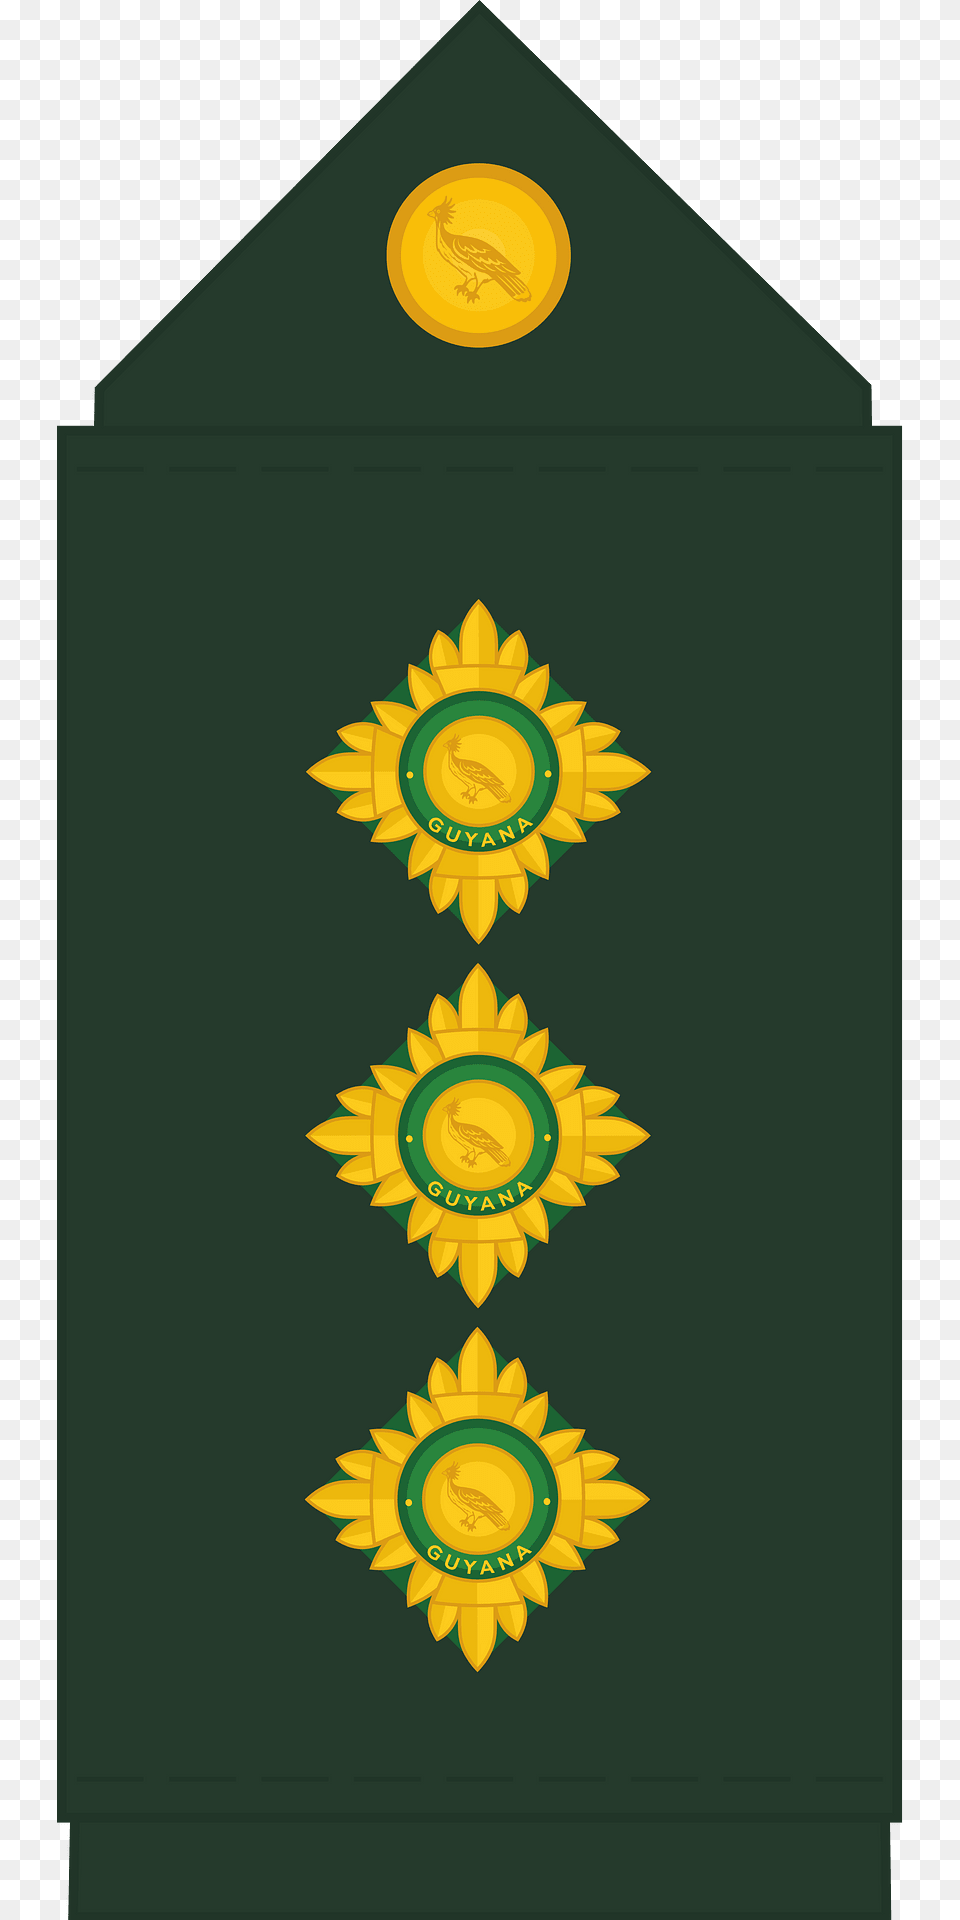 Guyana Defence Force Gdf Captain Rank Insignia Clipart, Flower, Plant, Sunflower Png Image